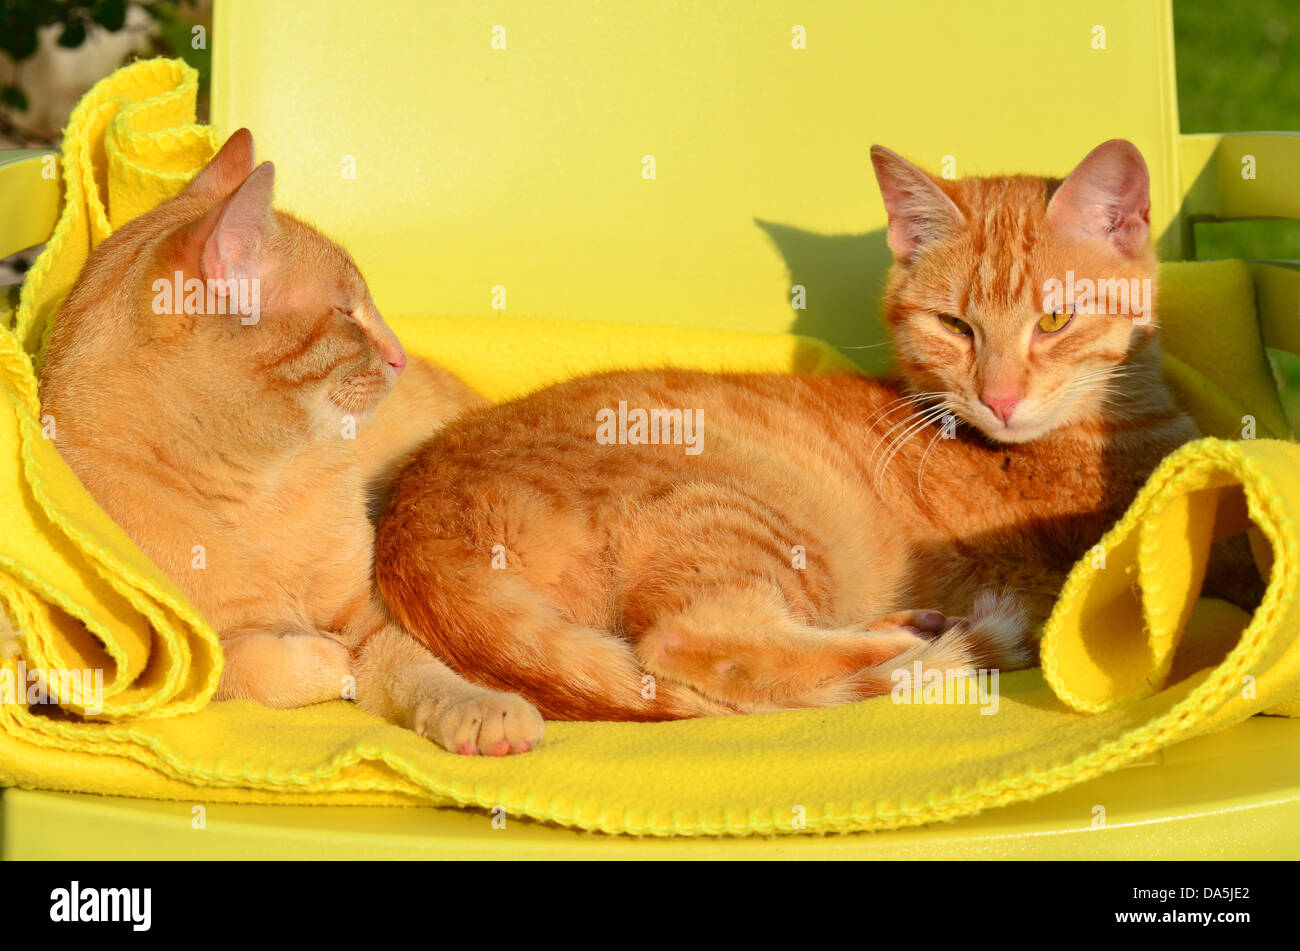 Two red cats on a yellow blanket in the sun Stock Photo